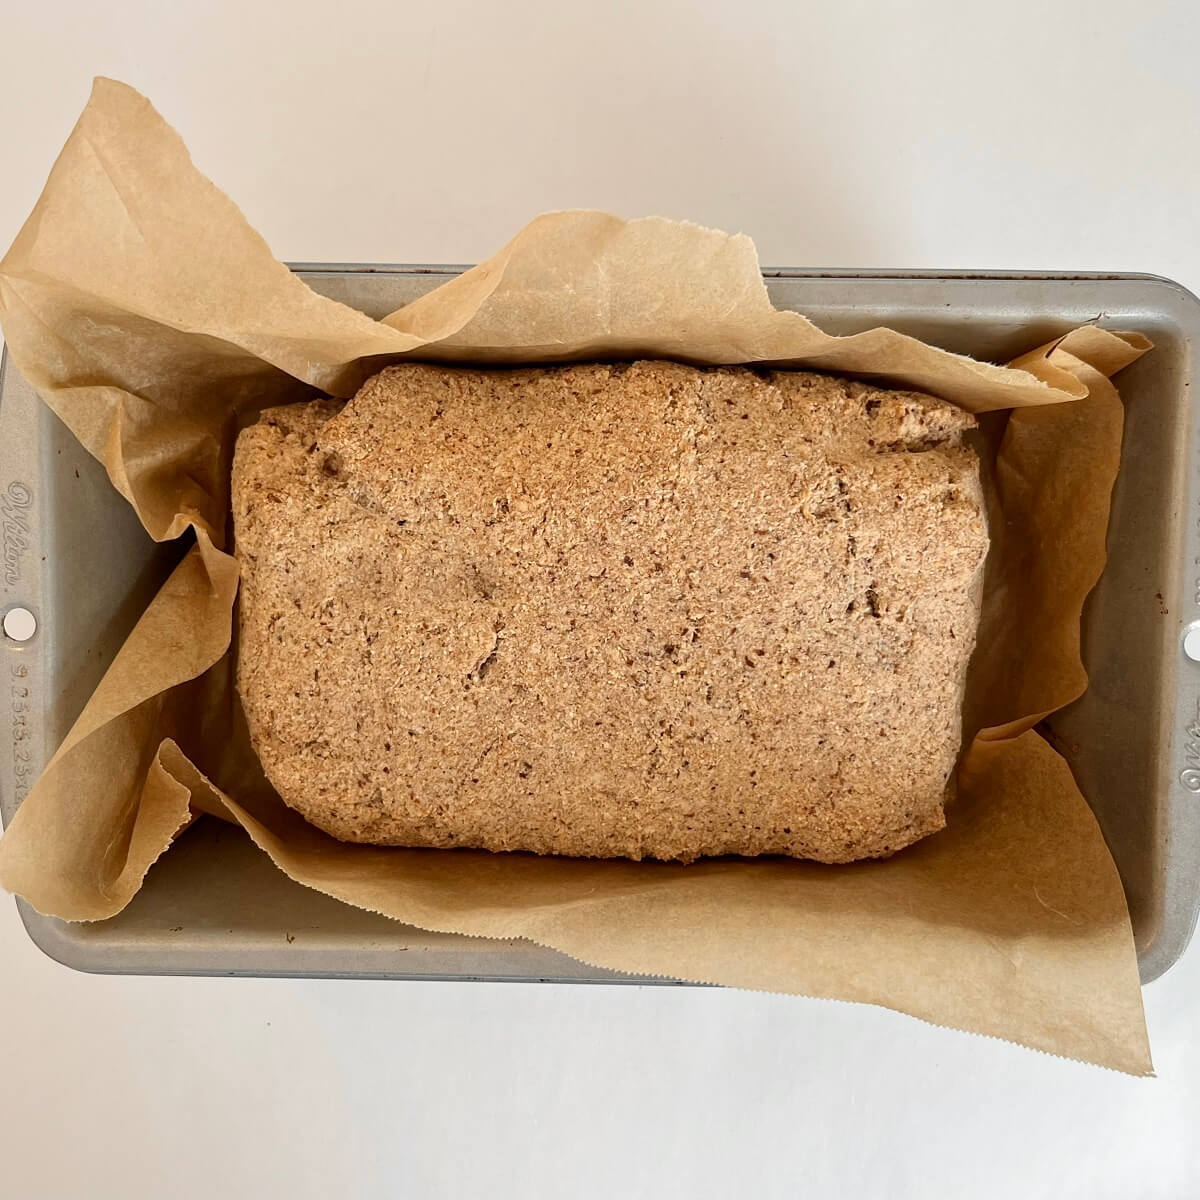 A freshly baked loaf of low-carb bread in a metal loaf pan lined with parchment paper.